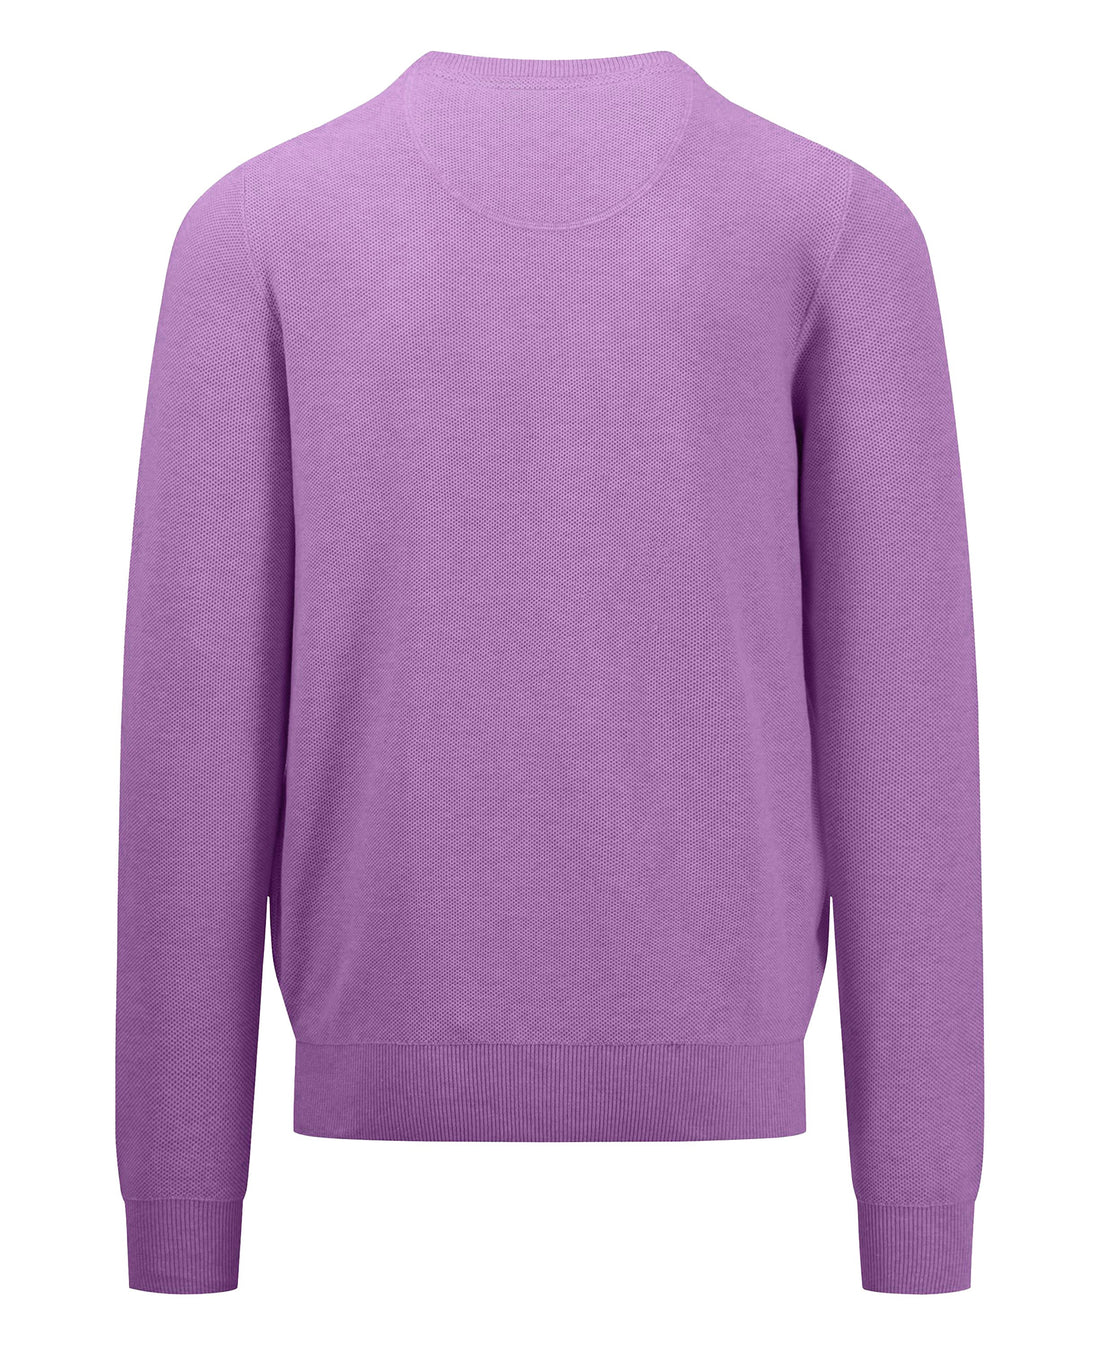 Structured O-Neck Knit - Dusty Lavender